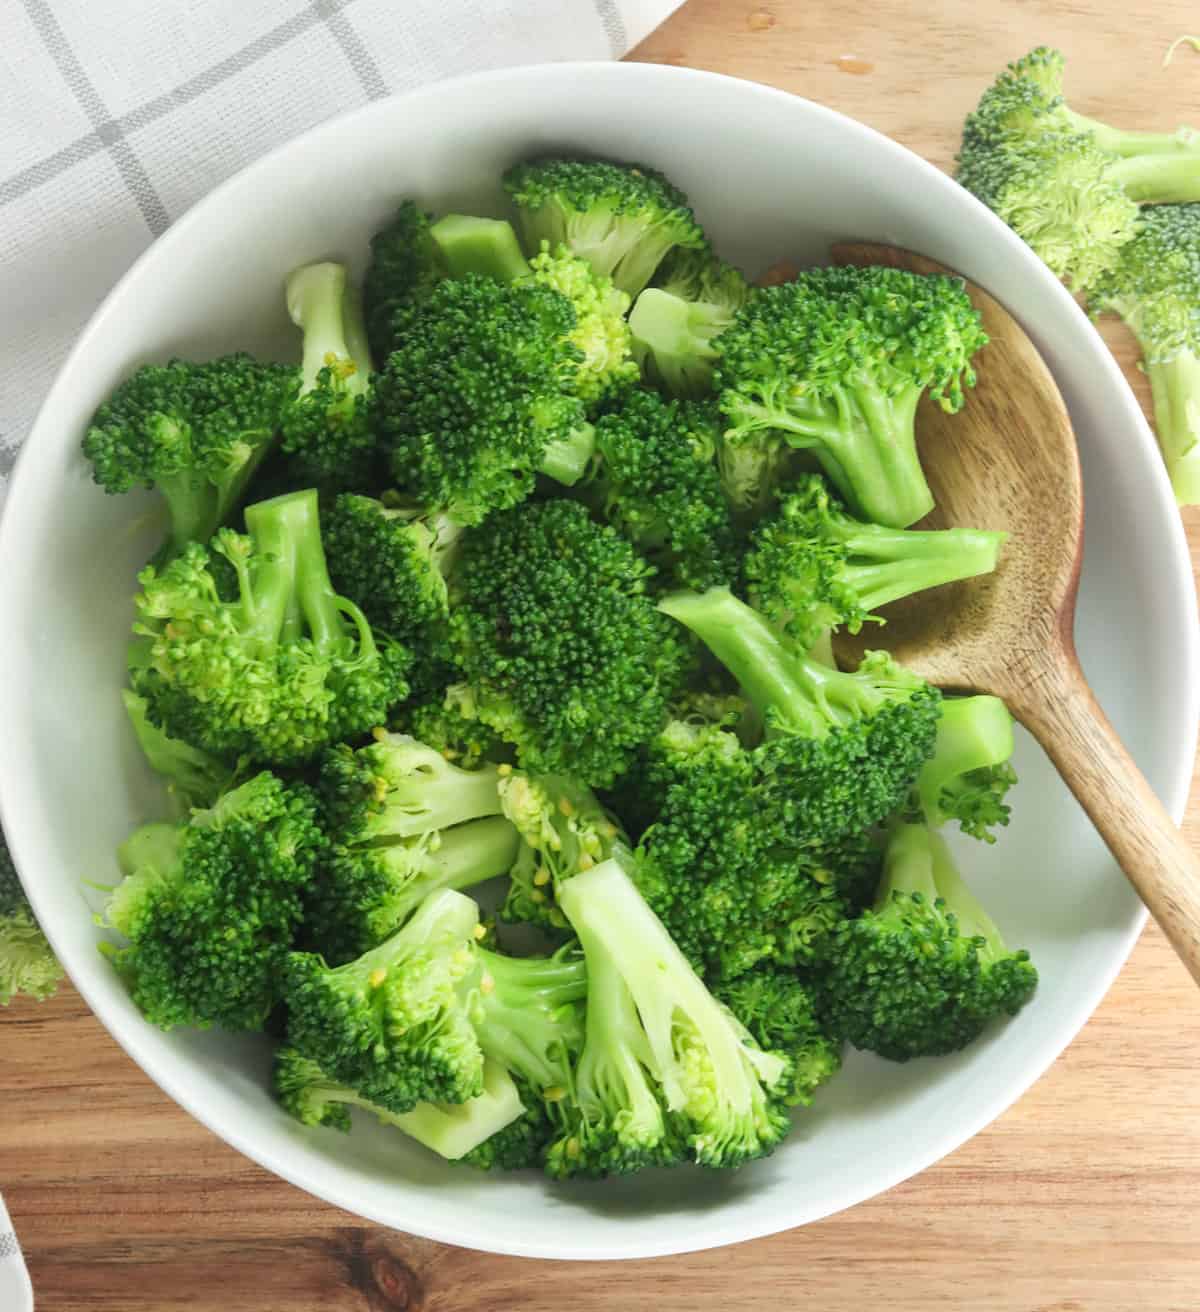 Serving up delicious blanched broccoli